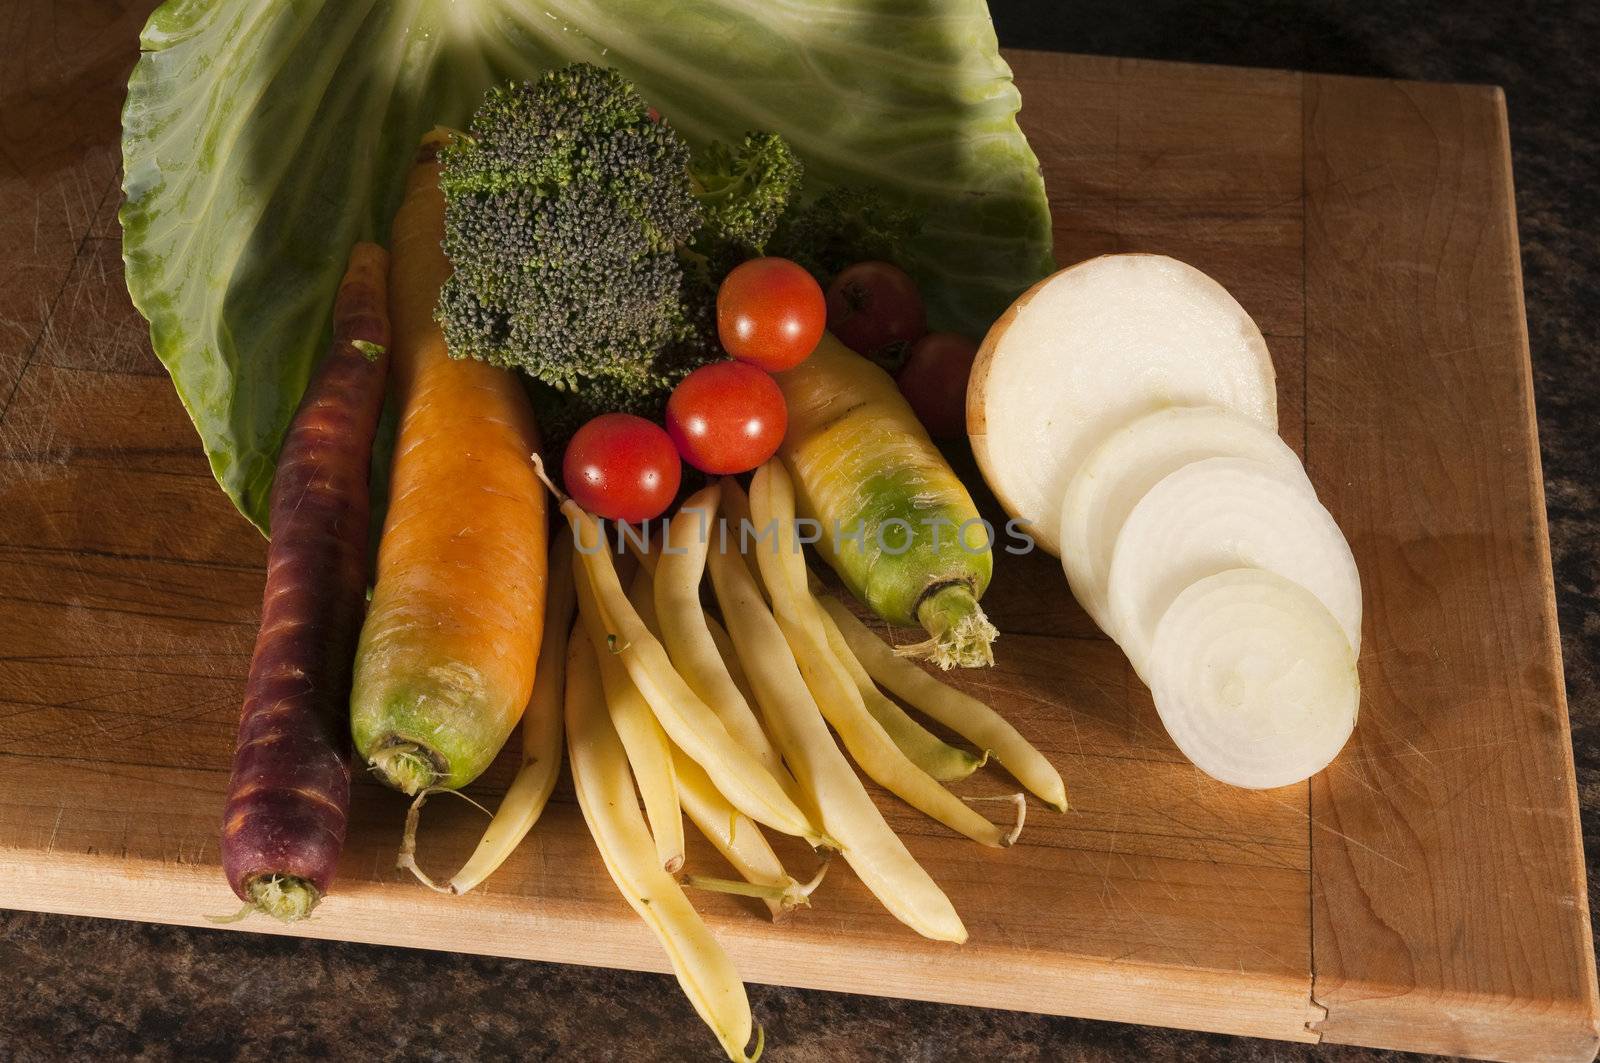 Arrangement of many different vegetables on a cutting board